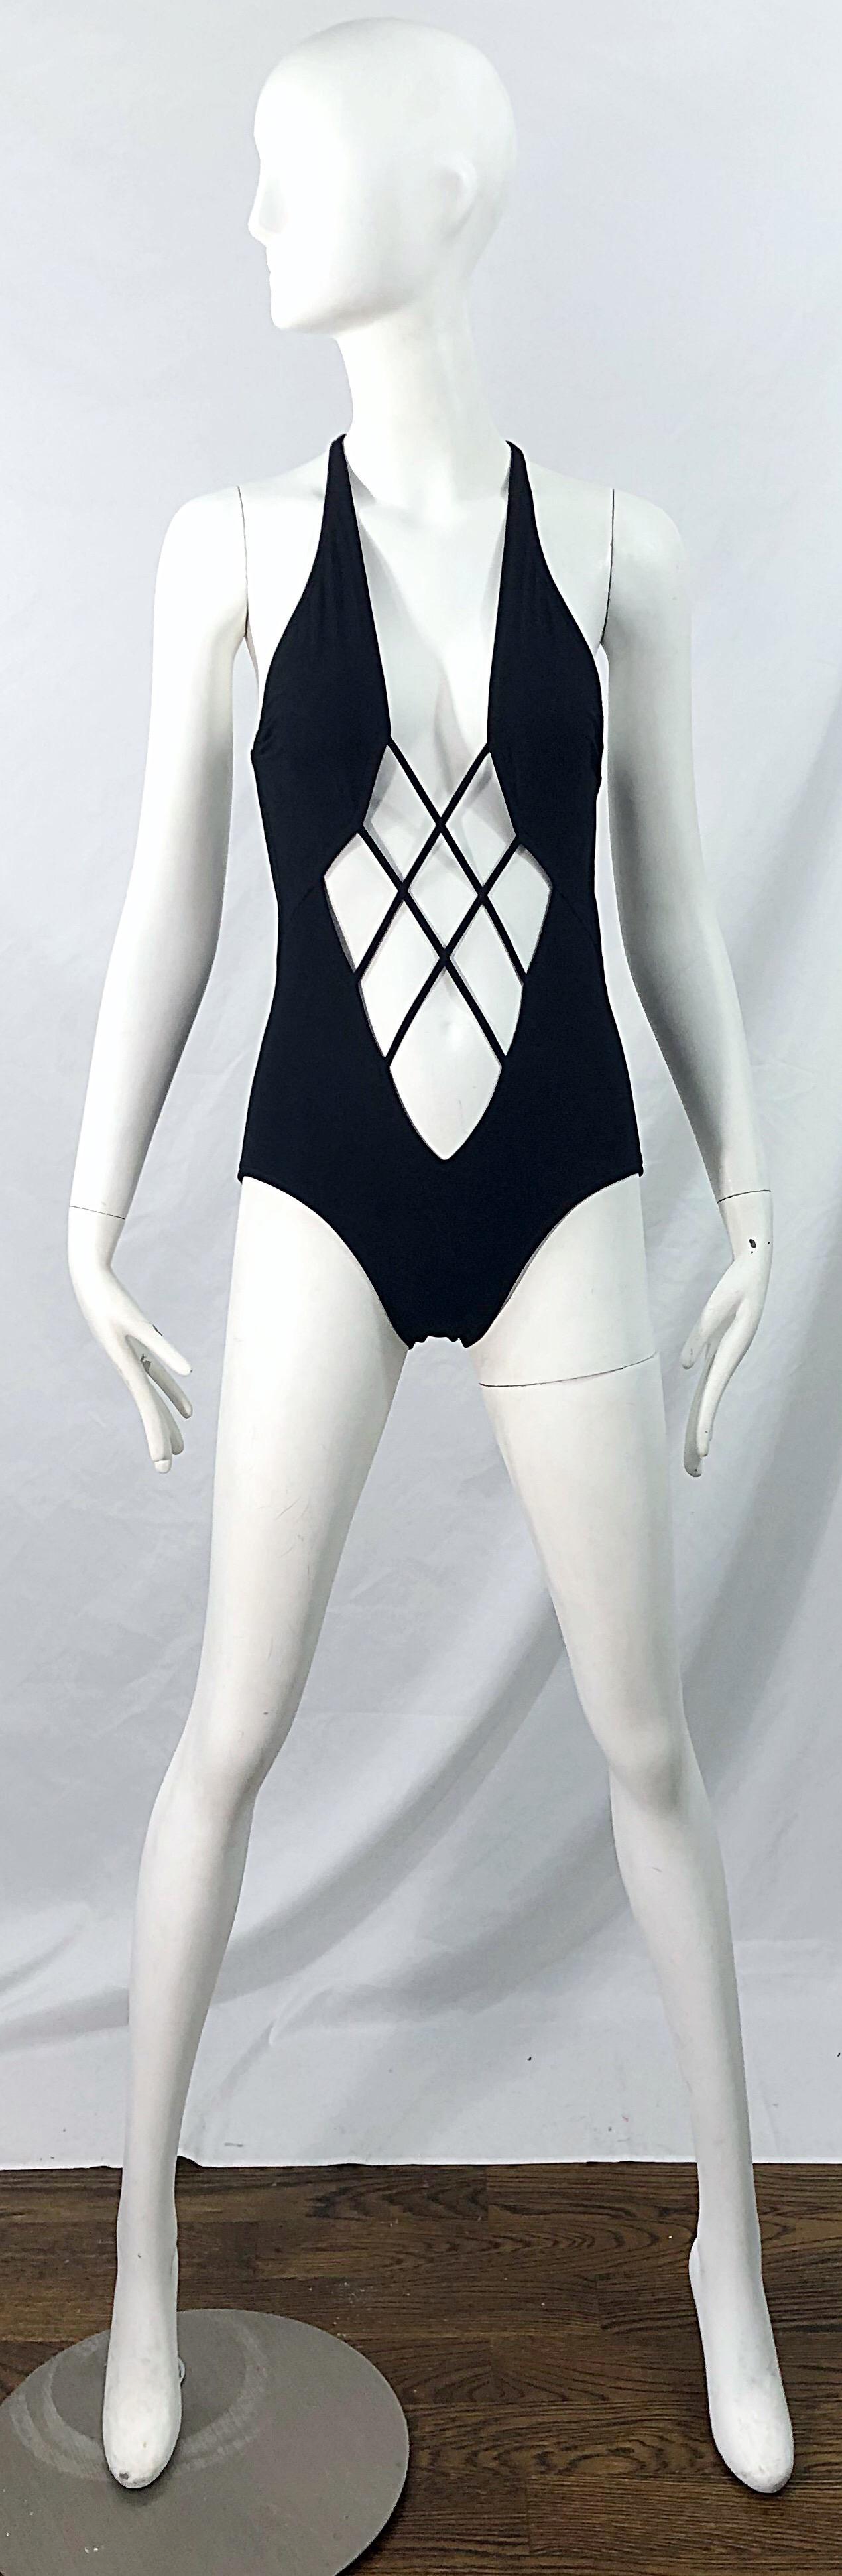 NWT Bob Mackie Late 1970s Black Sexy Cut Out One Piece Vintage Swimsuit Bodysuit 7